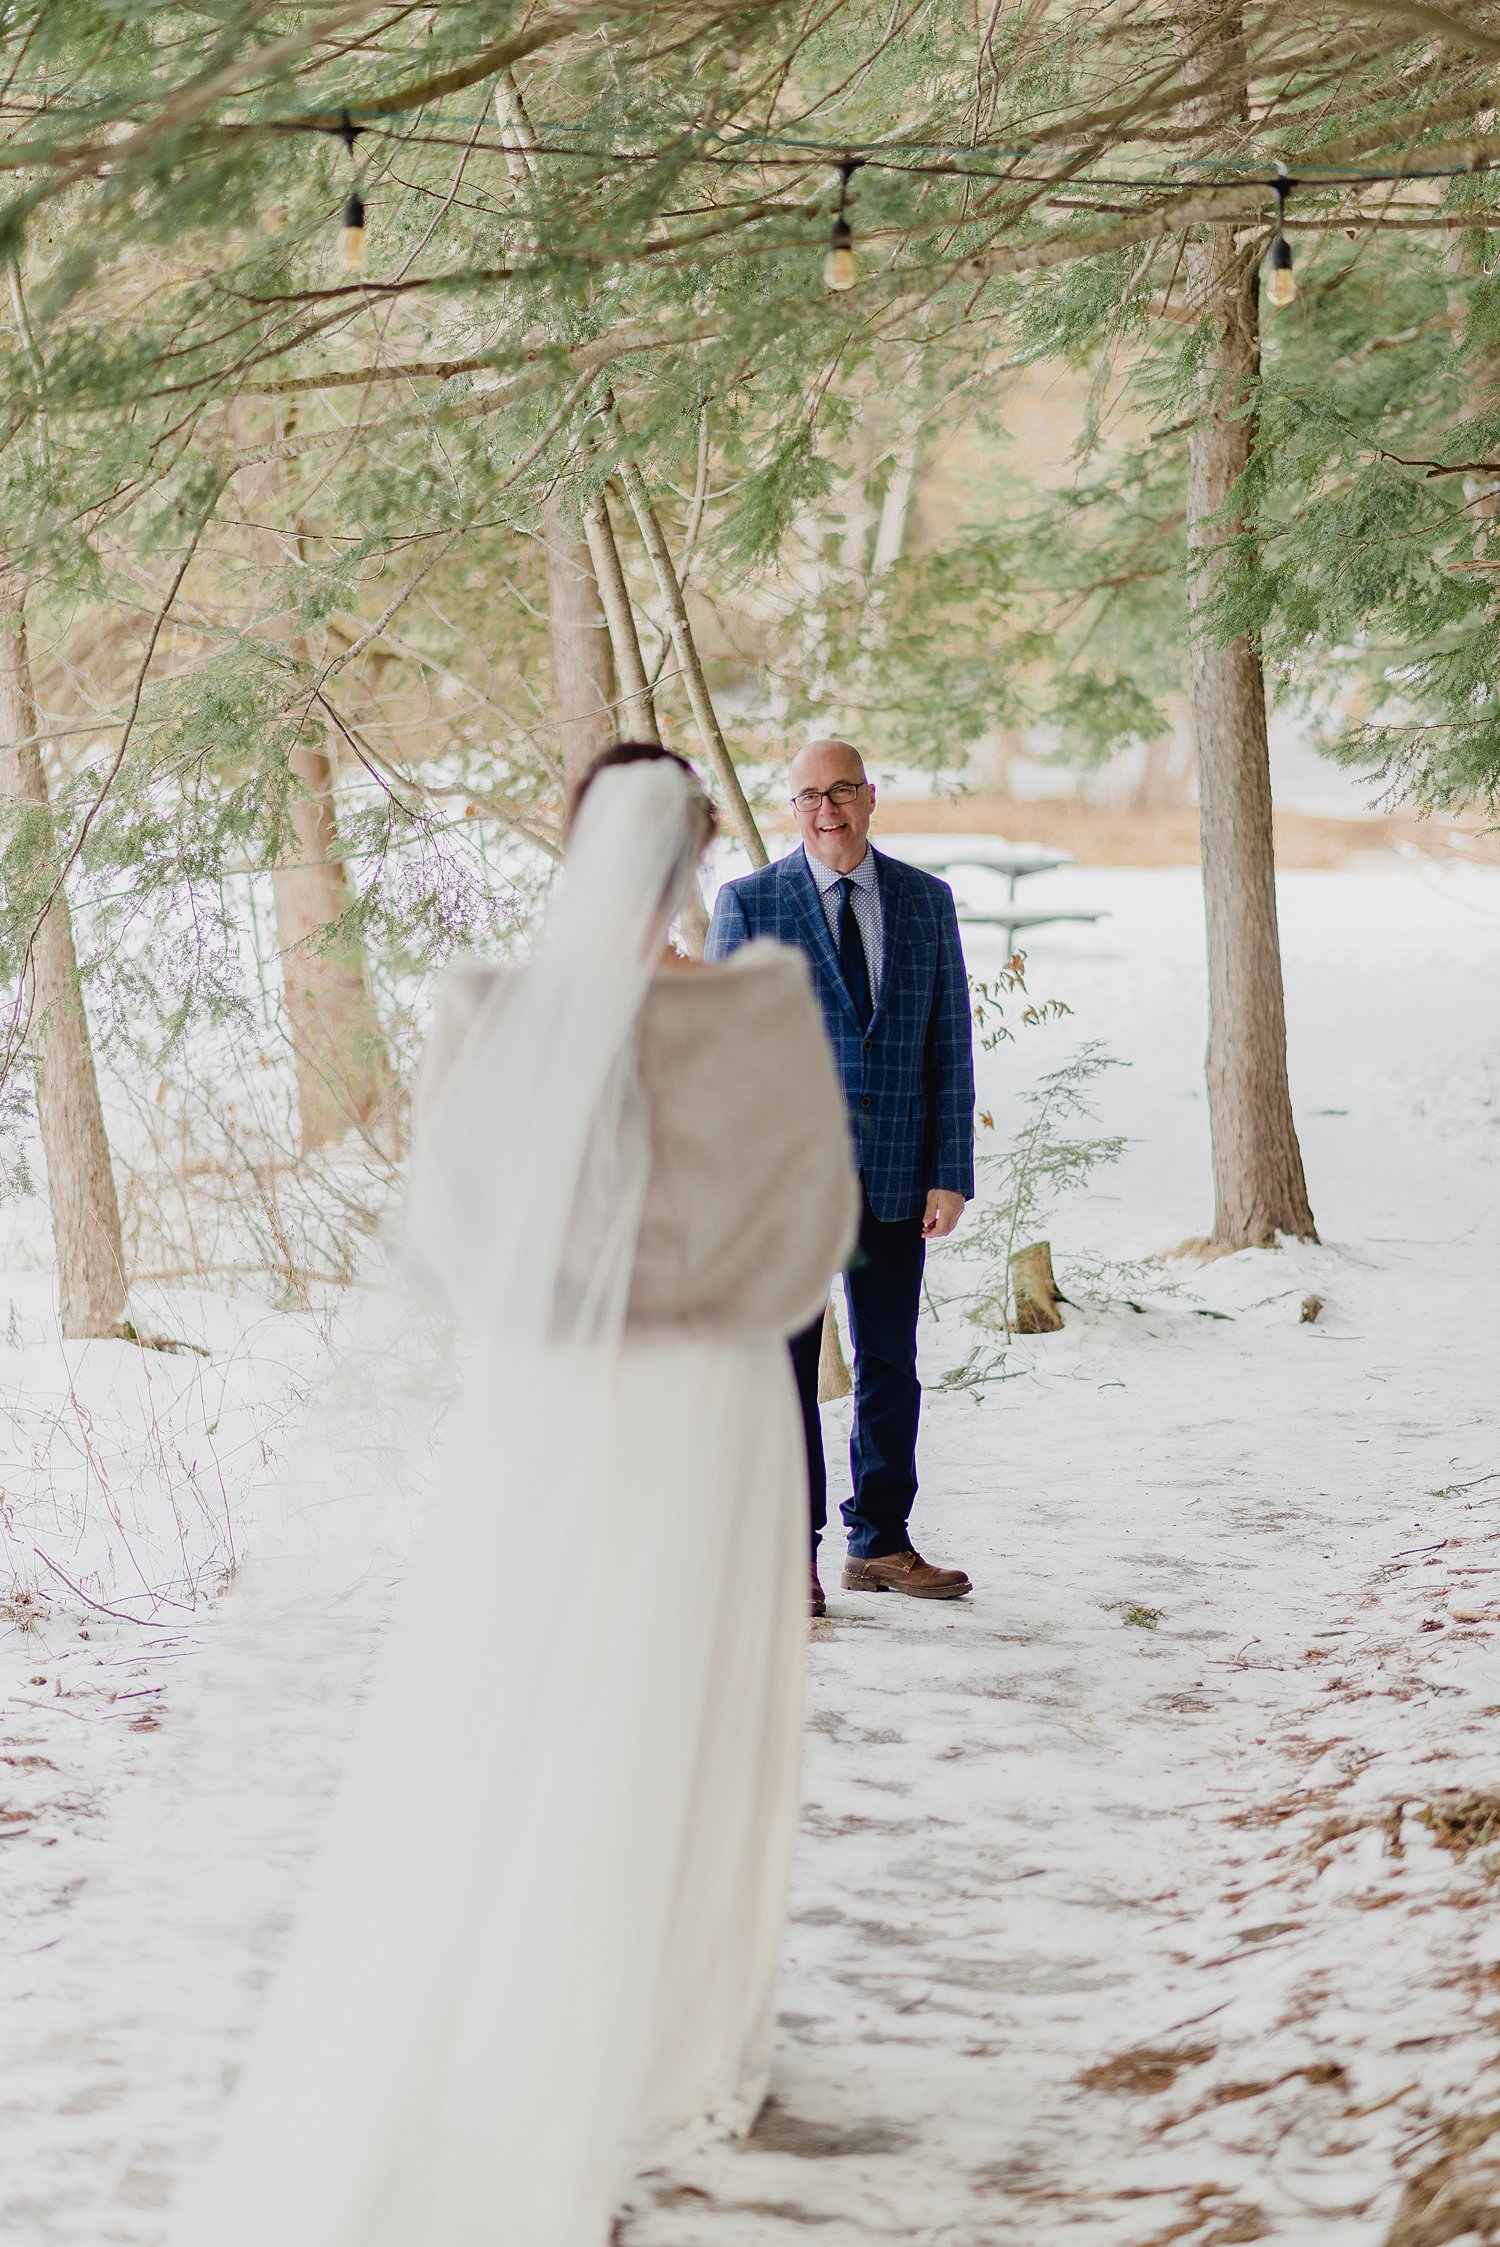 Intimate Winter Elopement at O'Hara Mill Homestead in Madoc, Ontario | Prince Edward County Wedding Photographer | Holly McMurter Photographs_0004.jpg